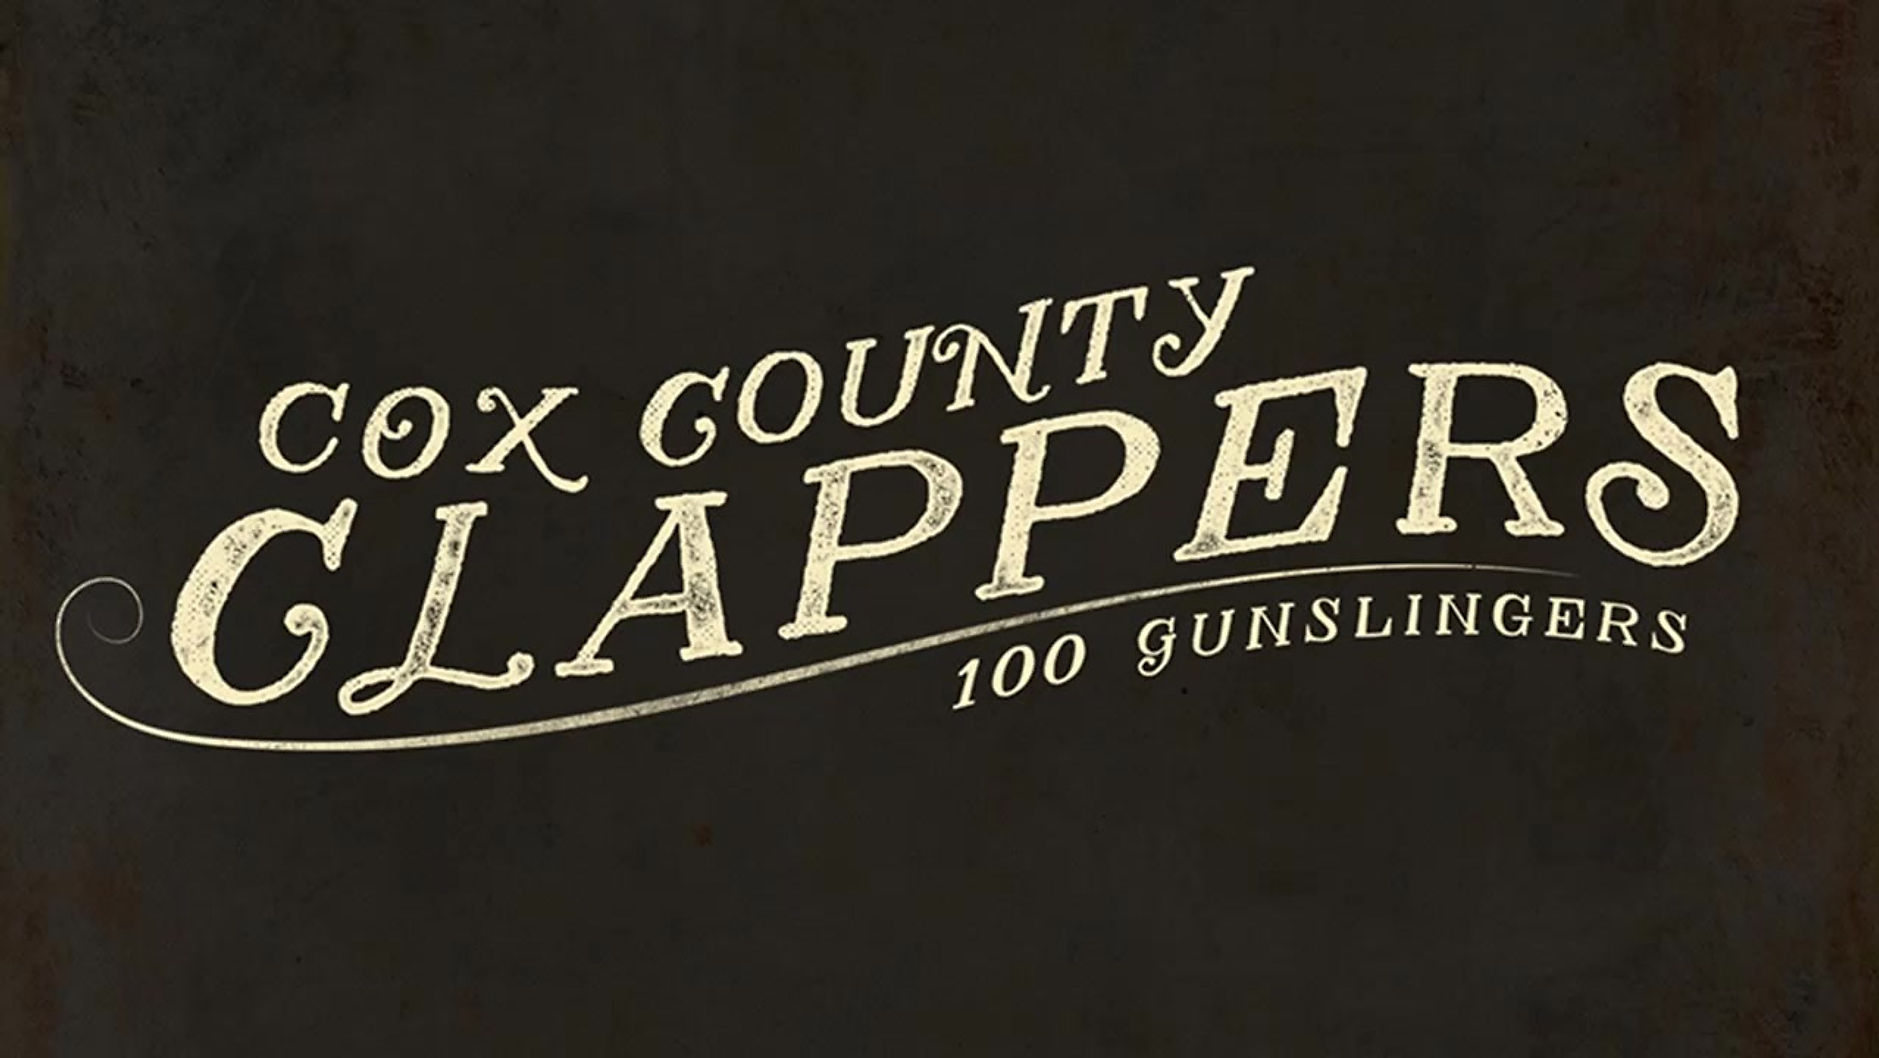 Cox County Clappers